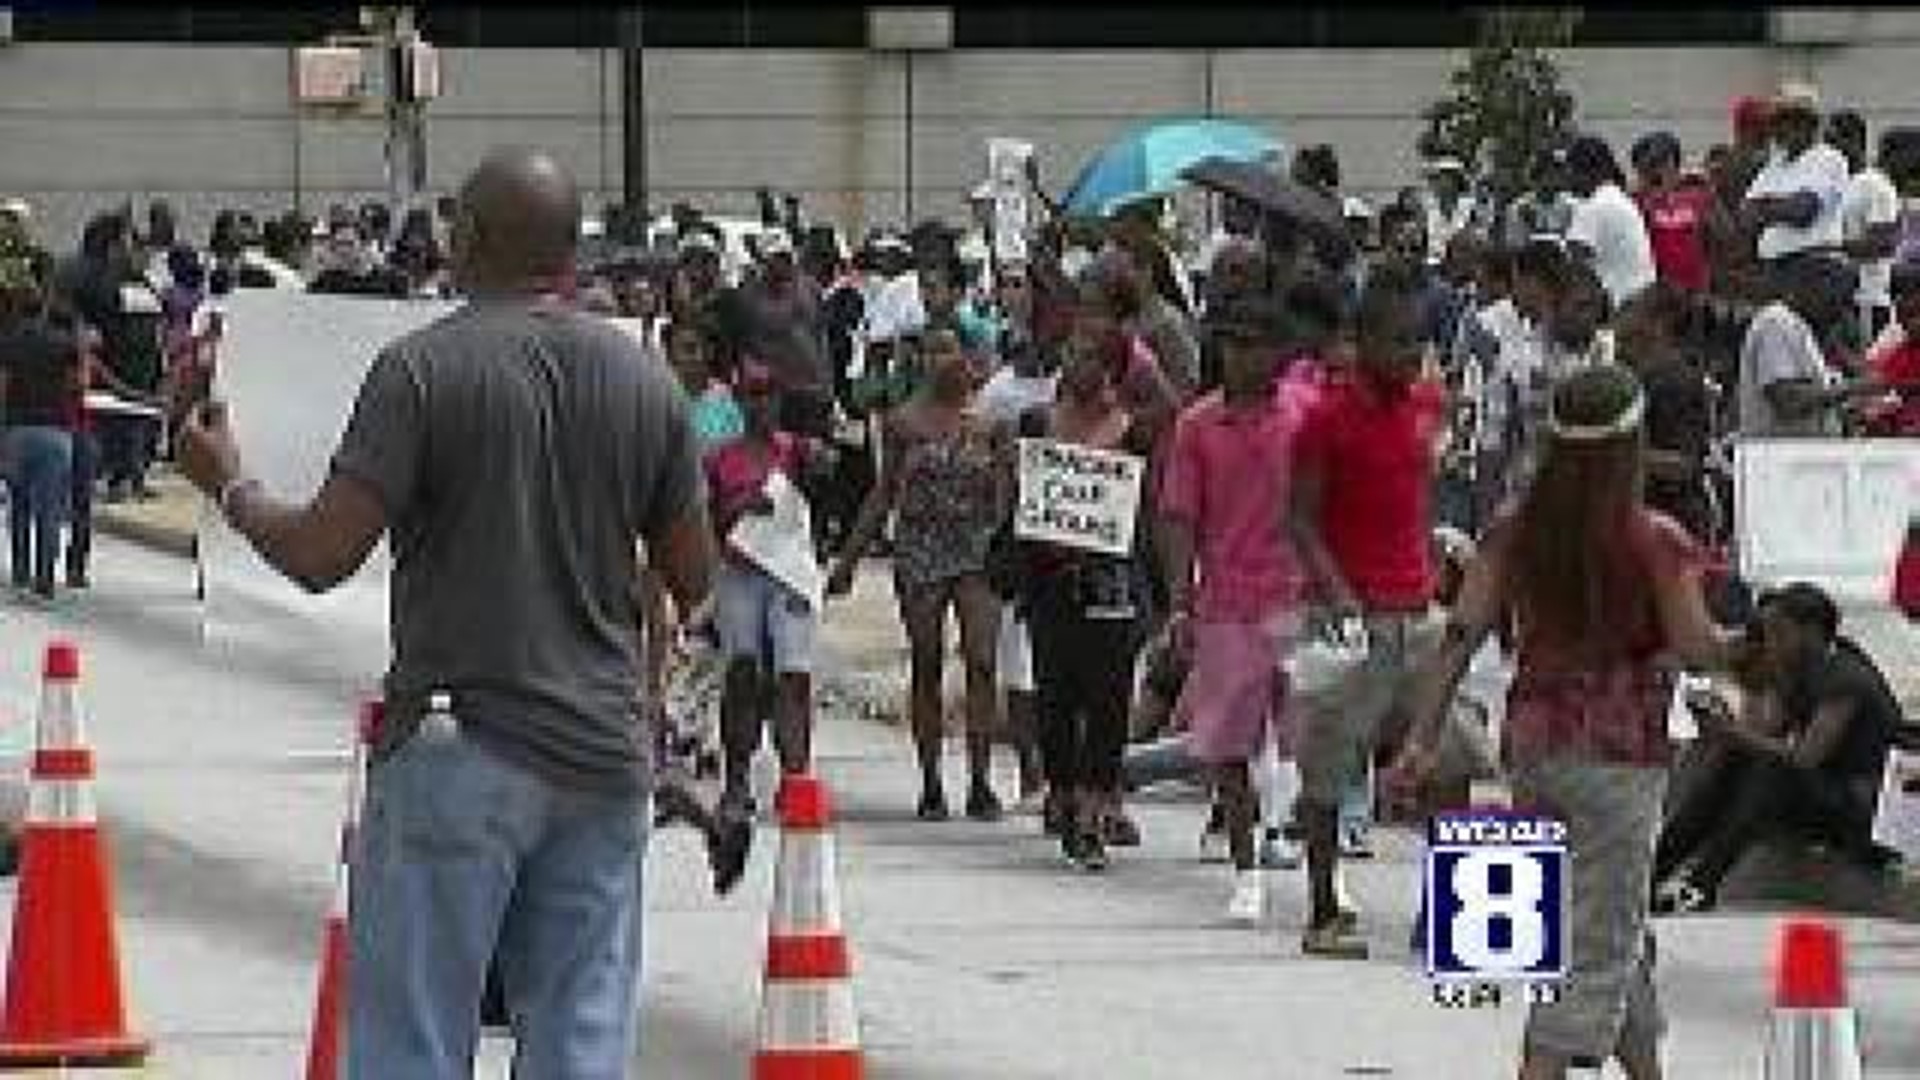 Rallies across the U.S. in remembrance of Trayvon Martin